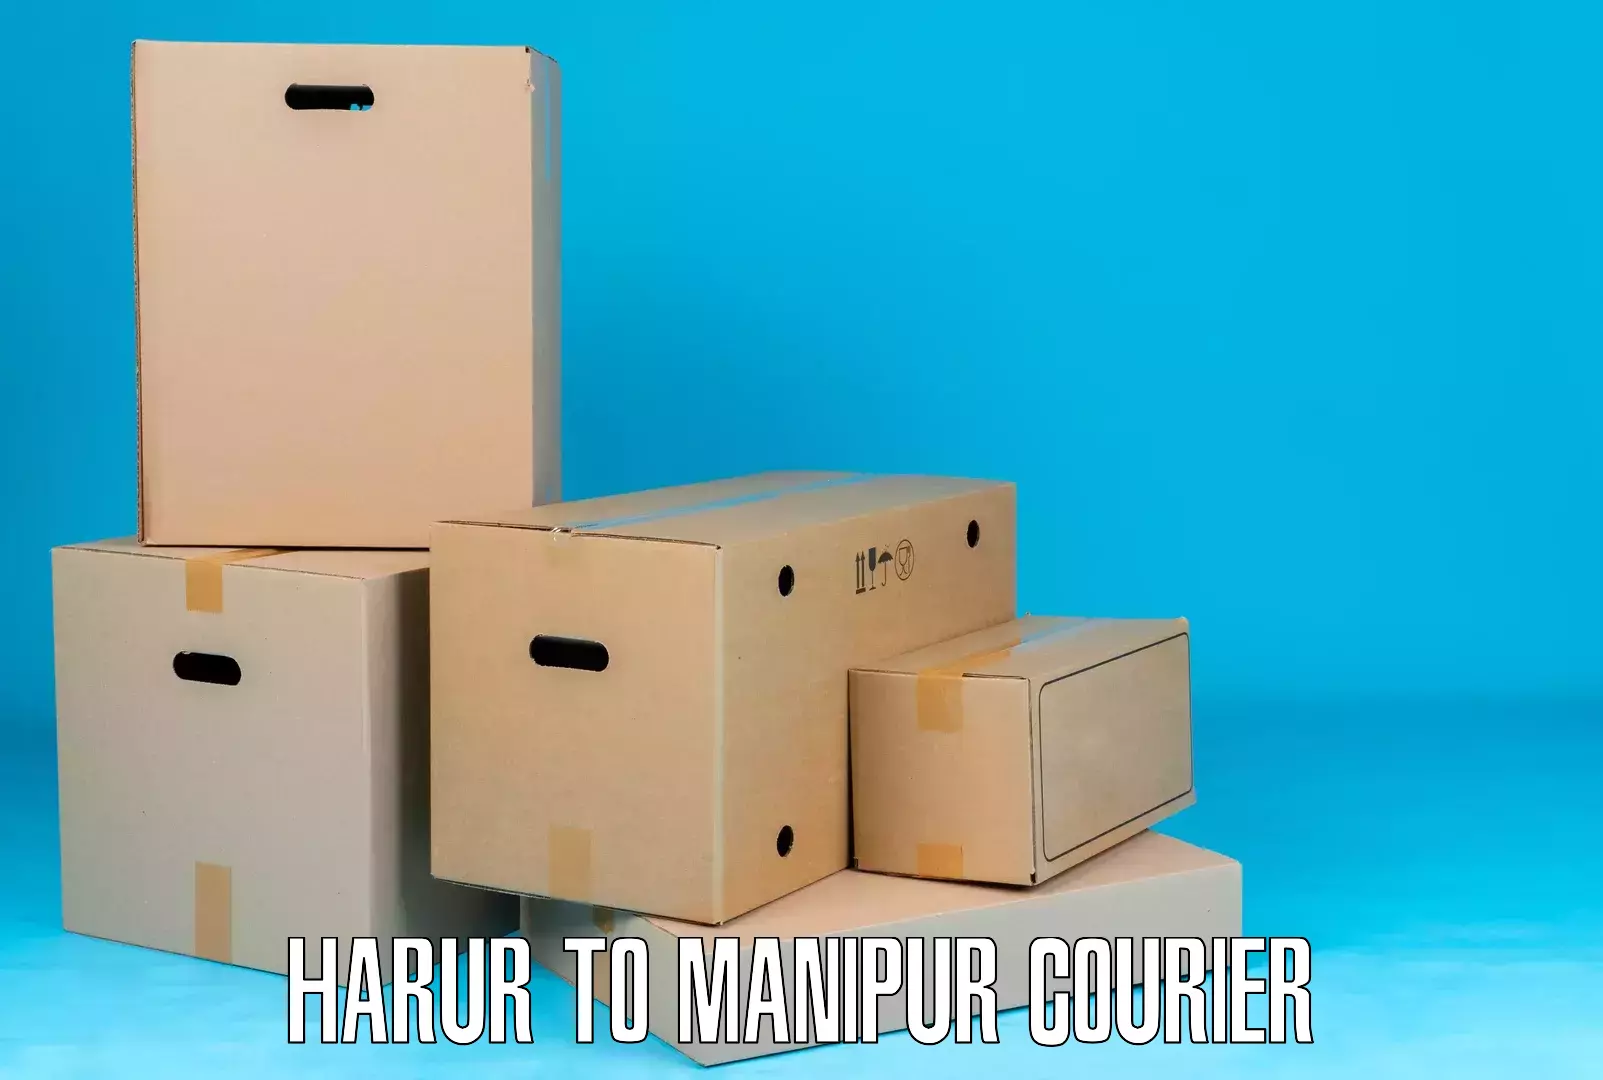 Online shipping calculator in Harur to Manipur